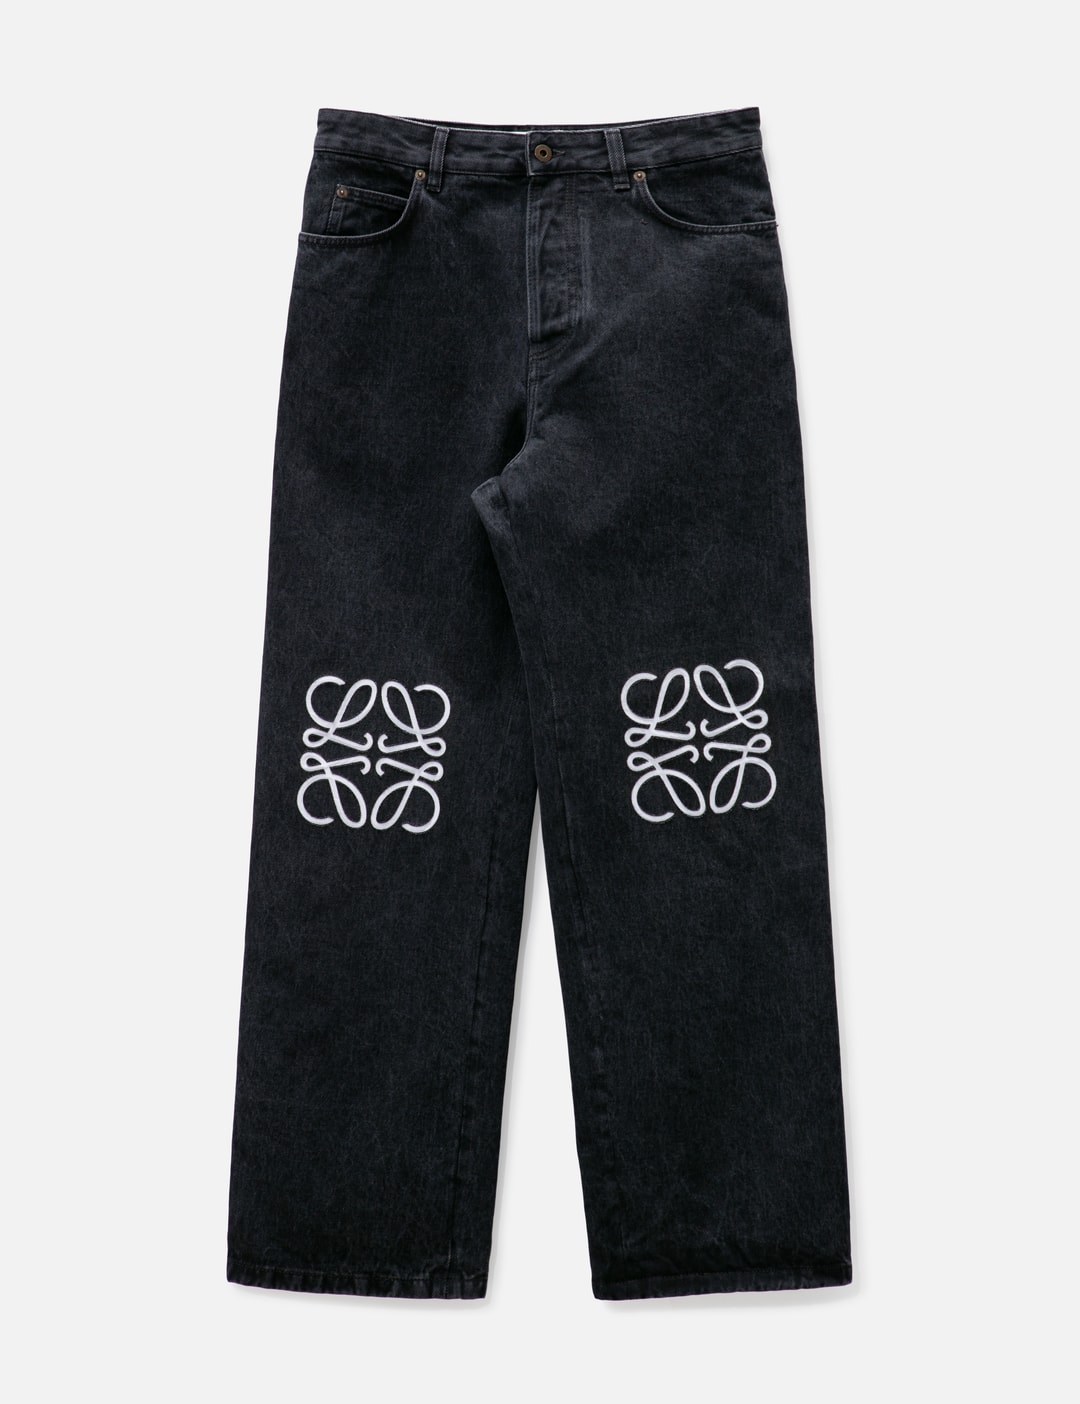 PIET - Skull Industrial Denim  HBX - Globally Curated Fashion and